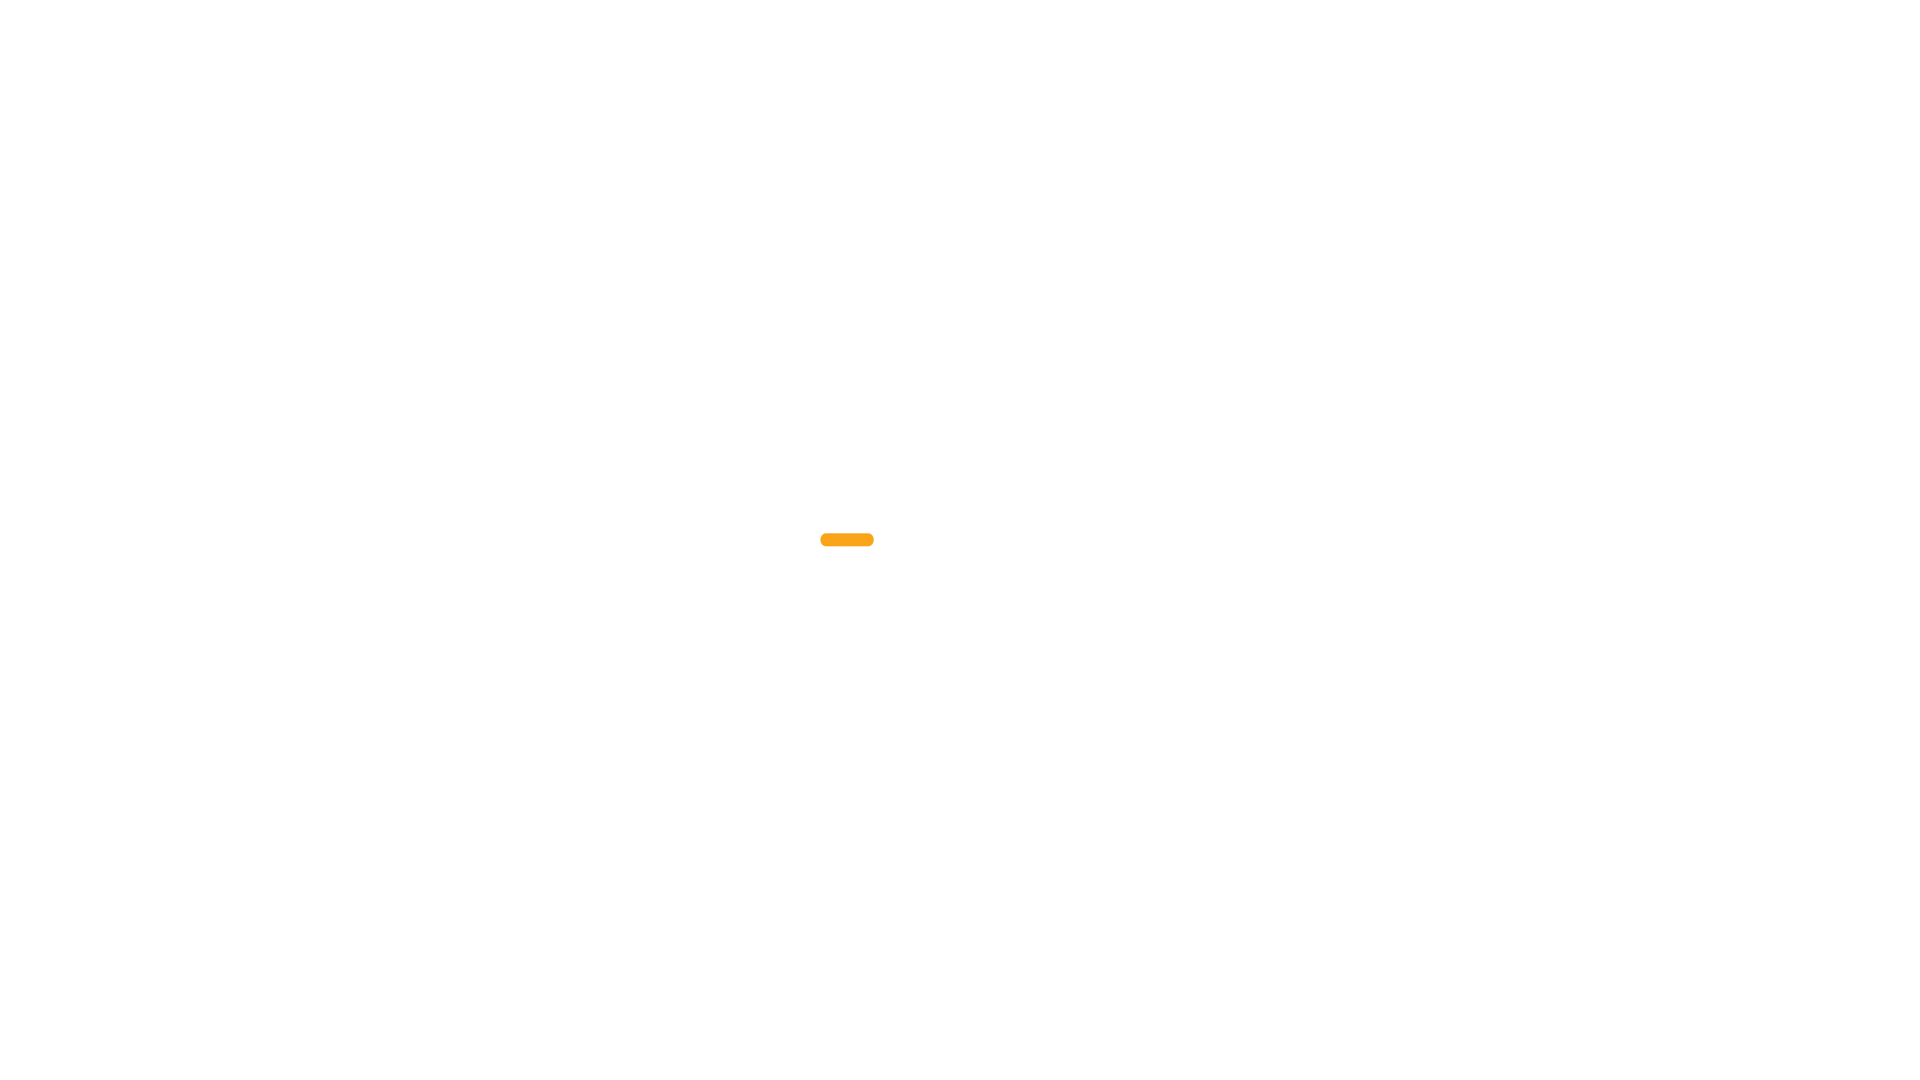 RoadConnect